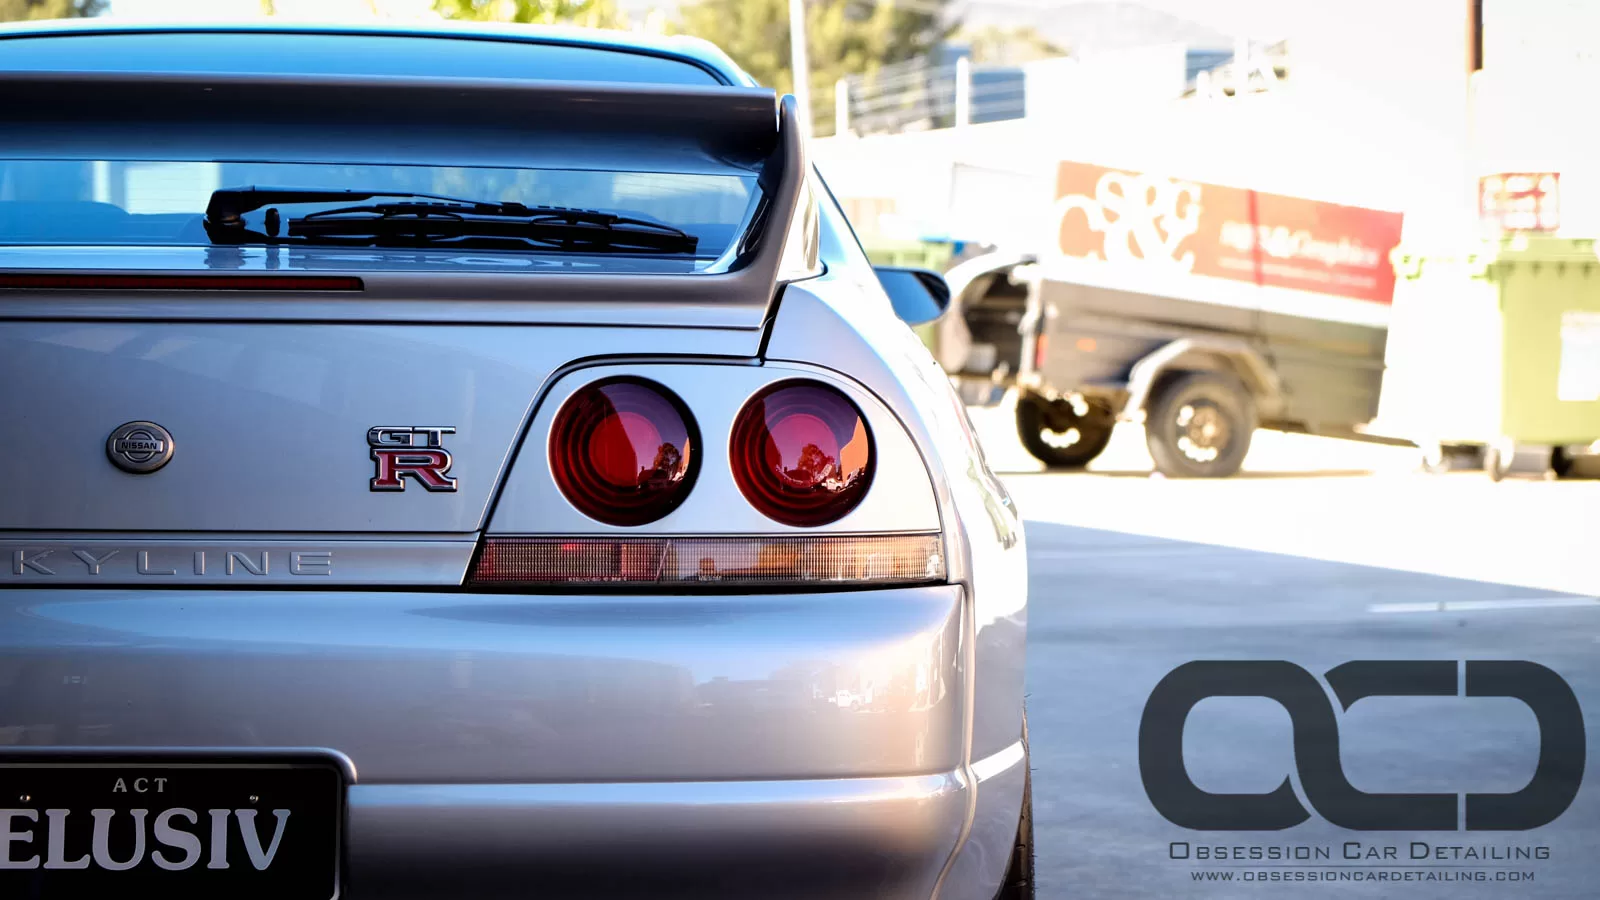 Nissan-R33-GTR-Paint-Protection-Canberra-31